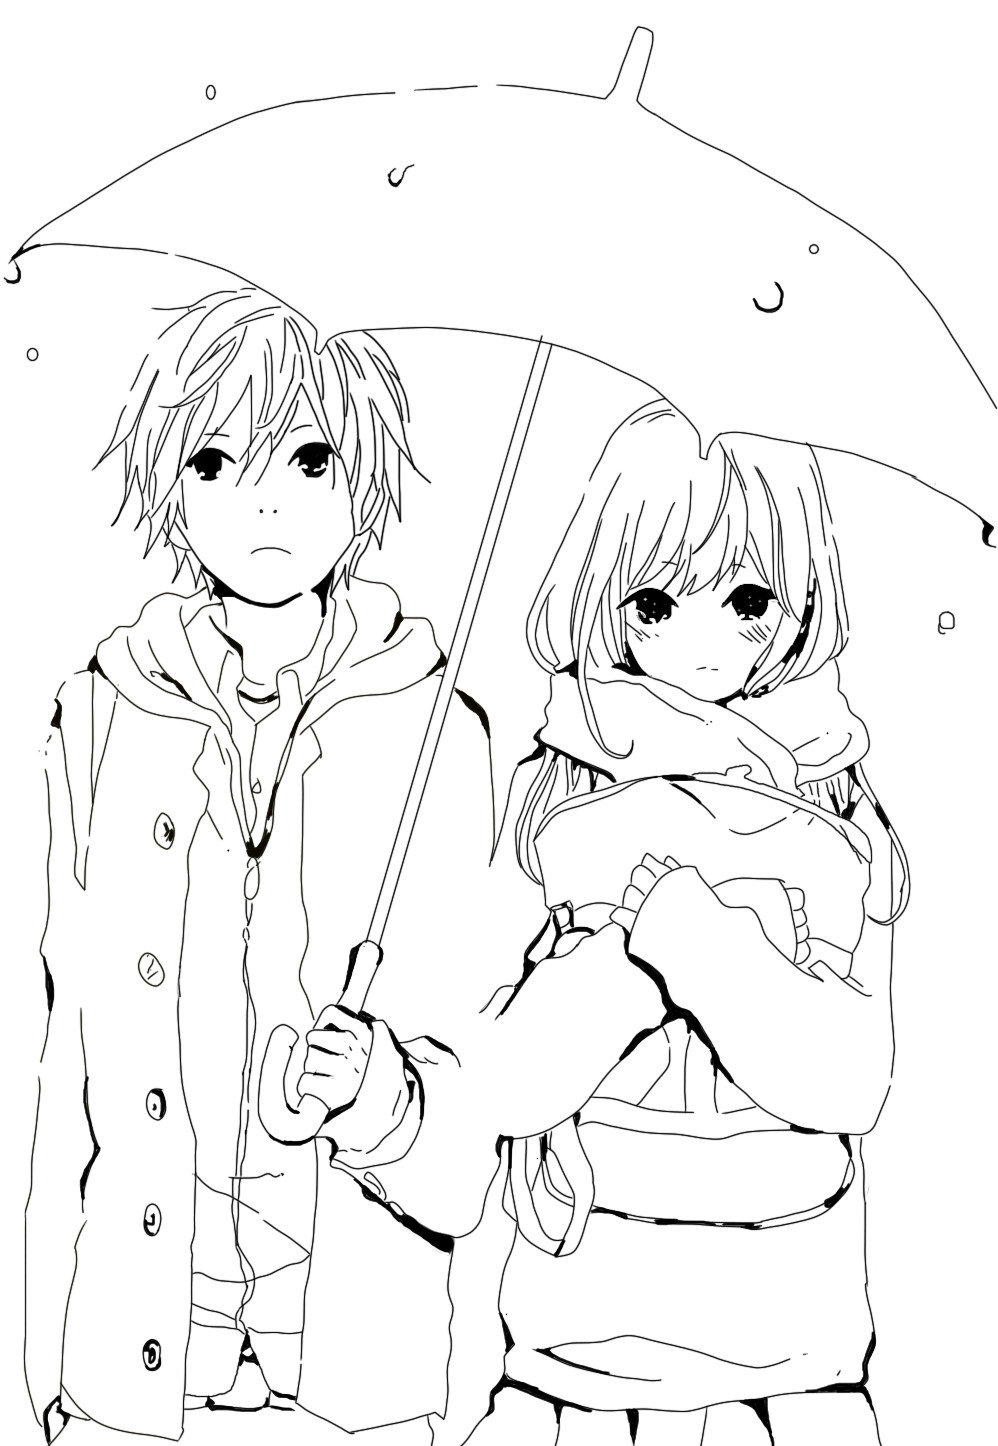 Manga Pages For Teenagers Coloring Pages